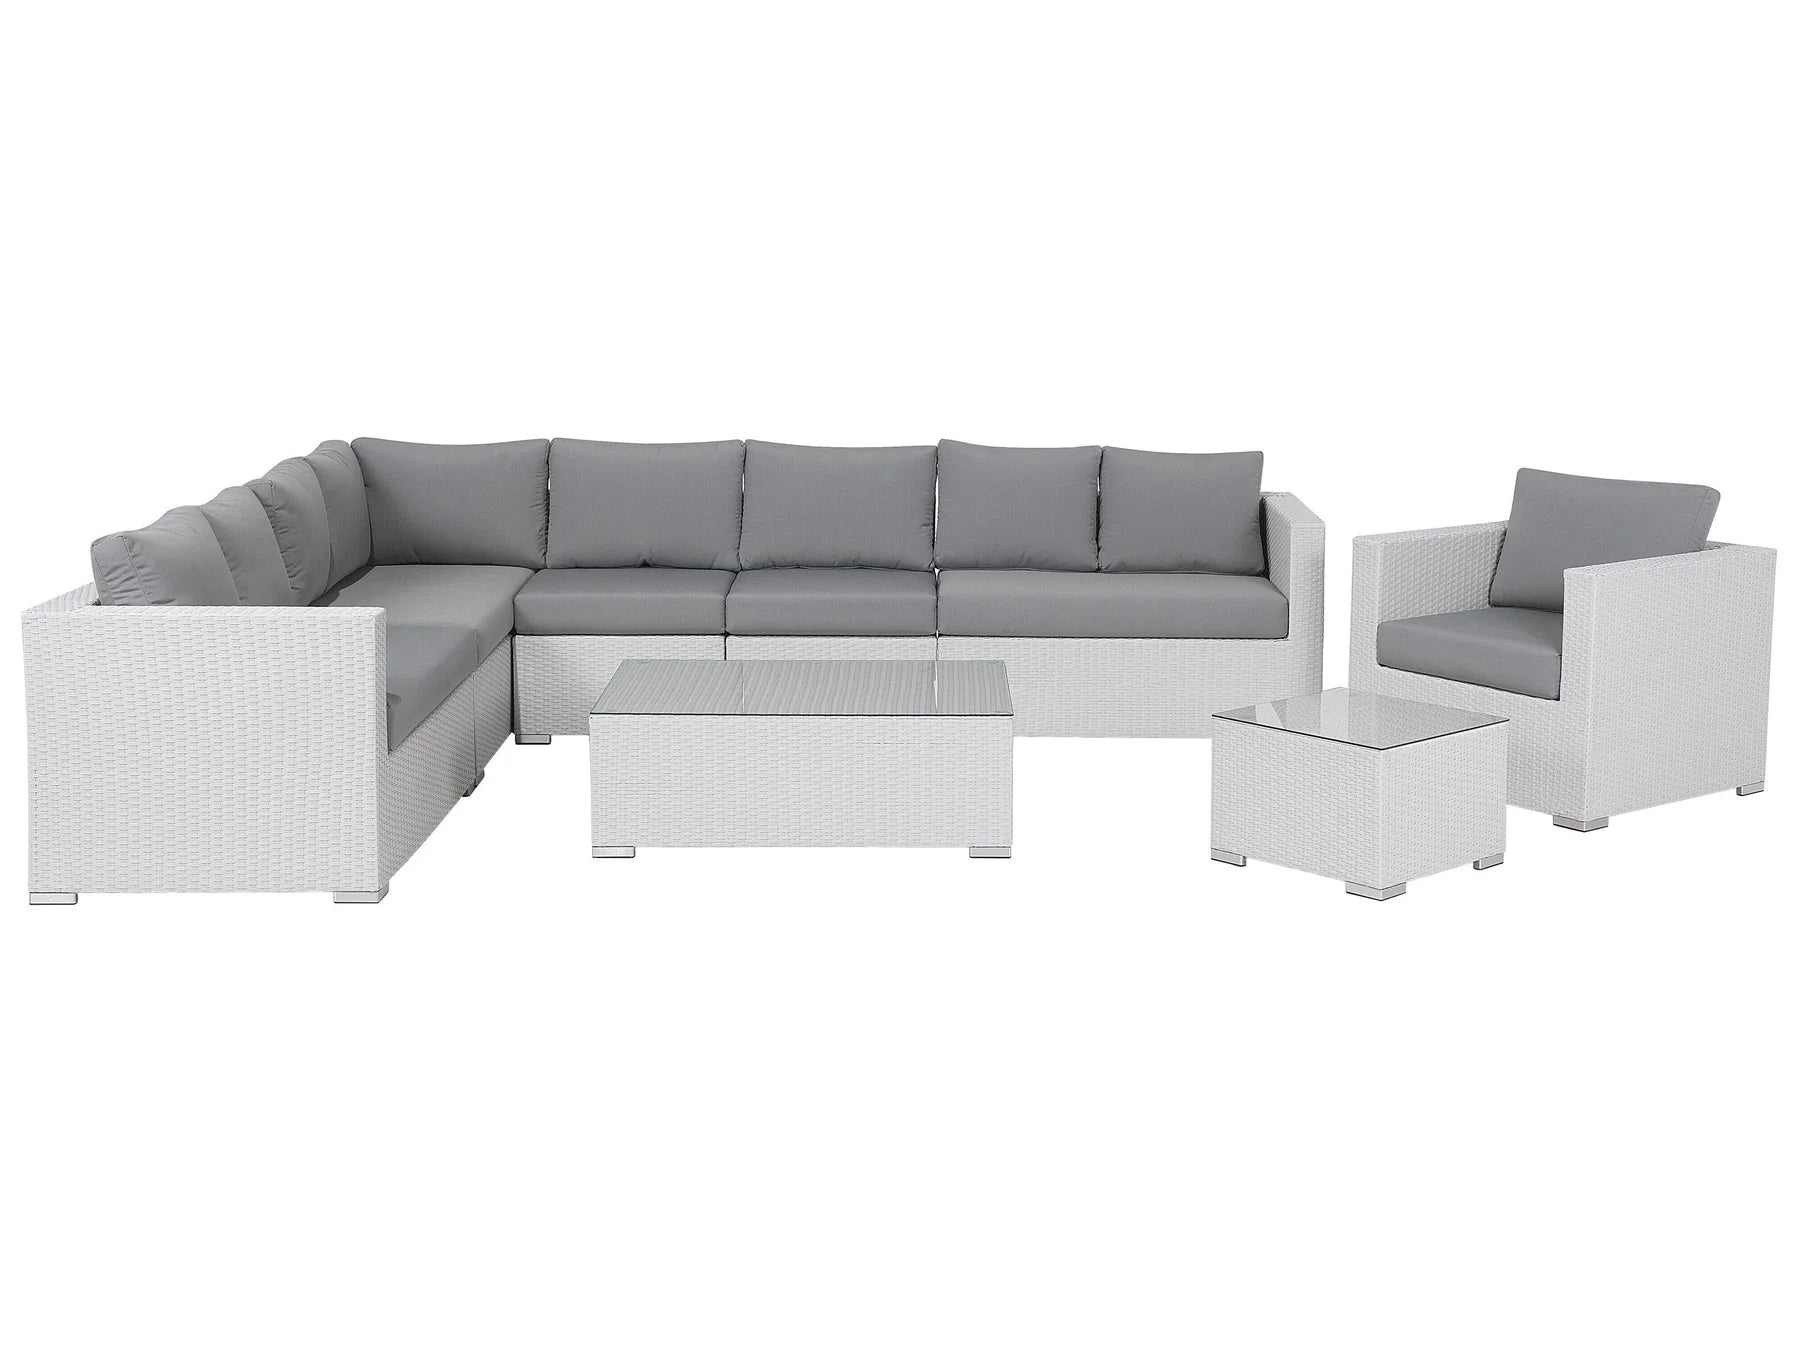 FURNIZY OUTDOOR SOFA SET 8 SEATER , SINGLE SEATER AND 2 CENTER TABLE SET